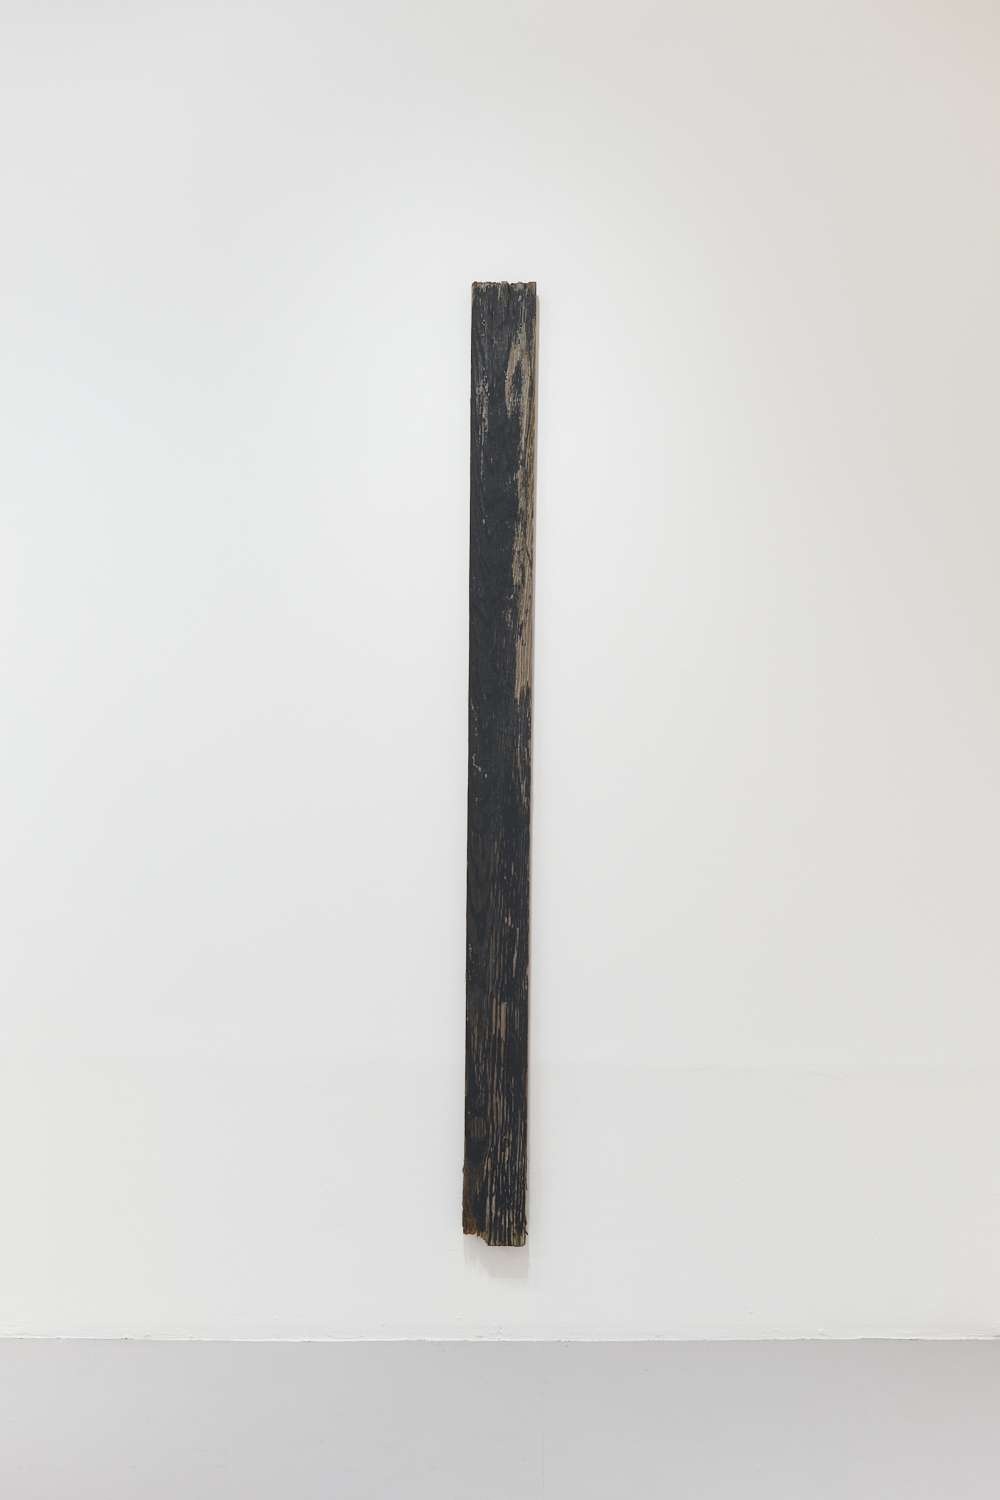 A long, thin, vertical artwork. It is of a plank of wood painted black with original wood grain peeking through and rough cuts on the top and bottom.